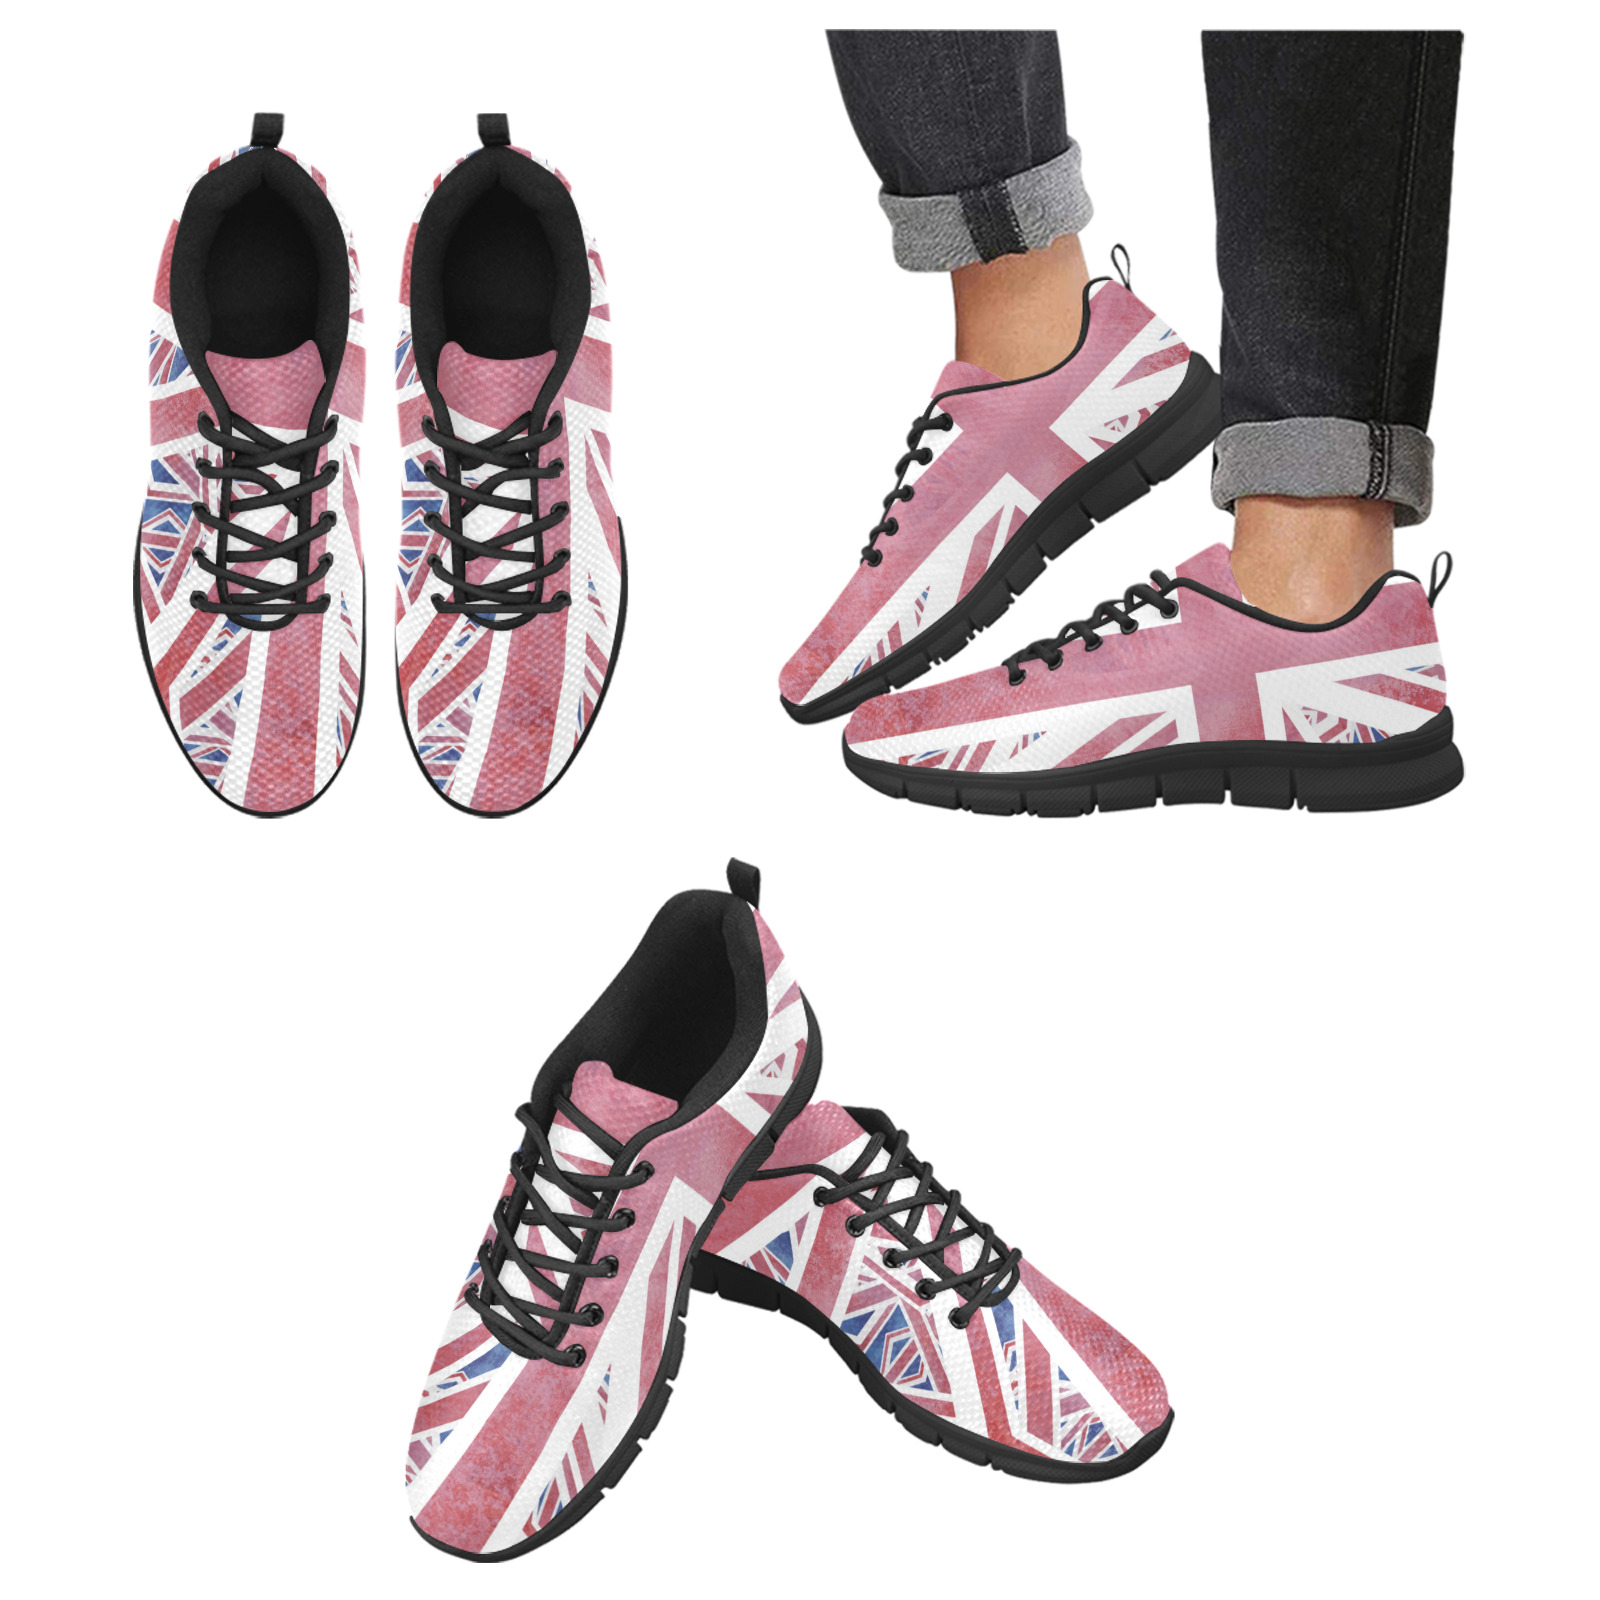 Abstract Union Jack British Flag Collage Women's Breathable Running Shoes (Model 055)